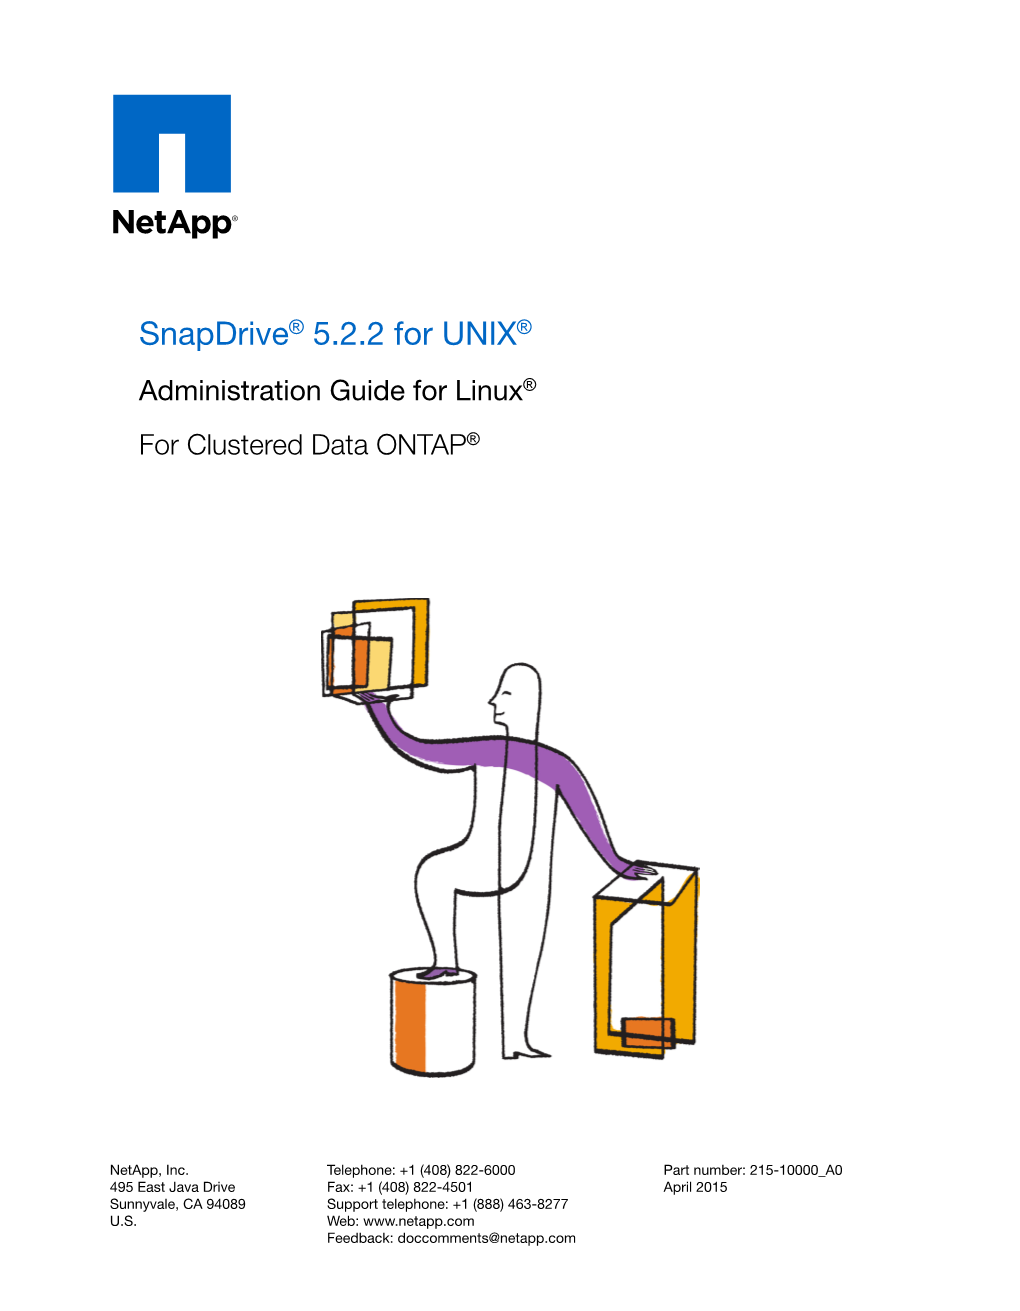 Snapdrive 5.2.2 for UNIX Administration Guide for Linux For